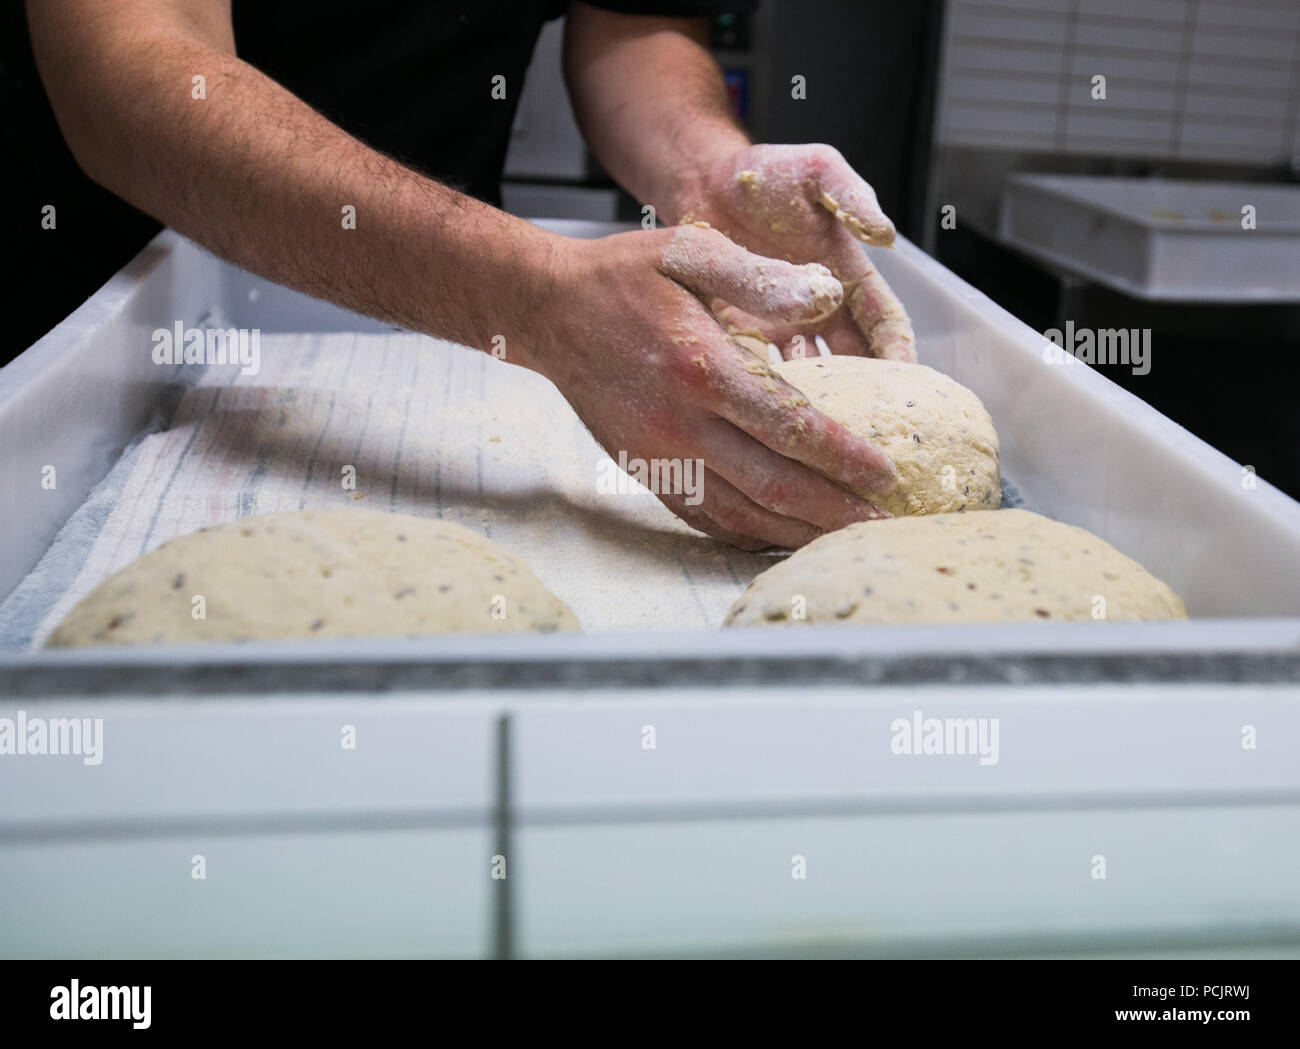 Bread being made at Hawthorn Common cafe in Melbourne Stock Photo